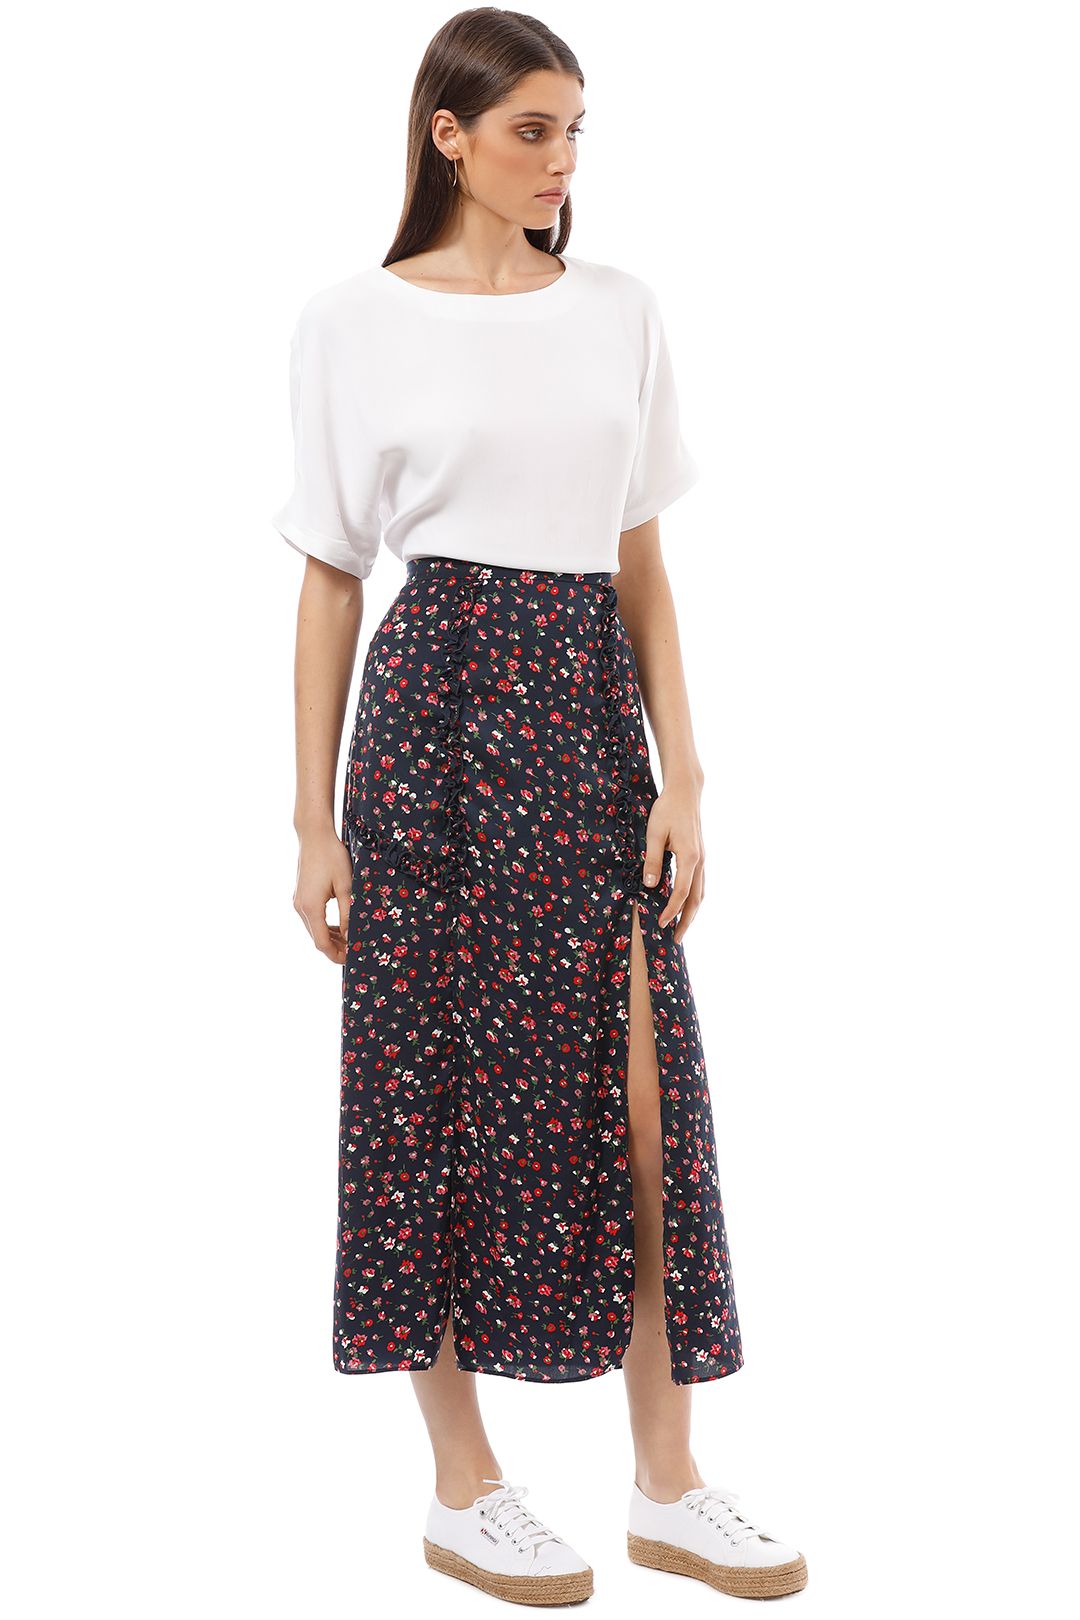 The Fifth - Sonic Skirt - Floral - Side